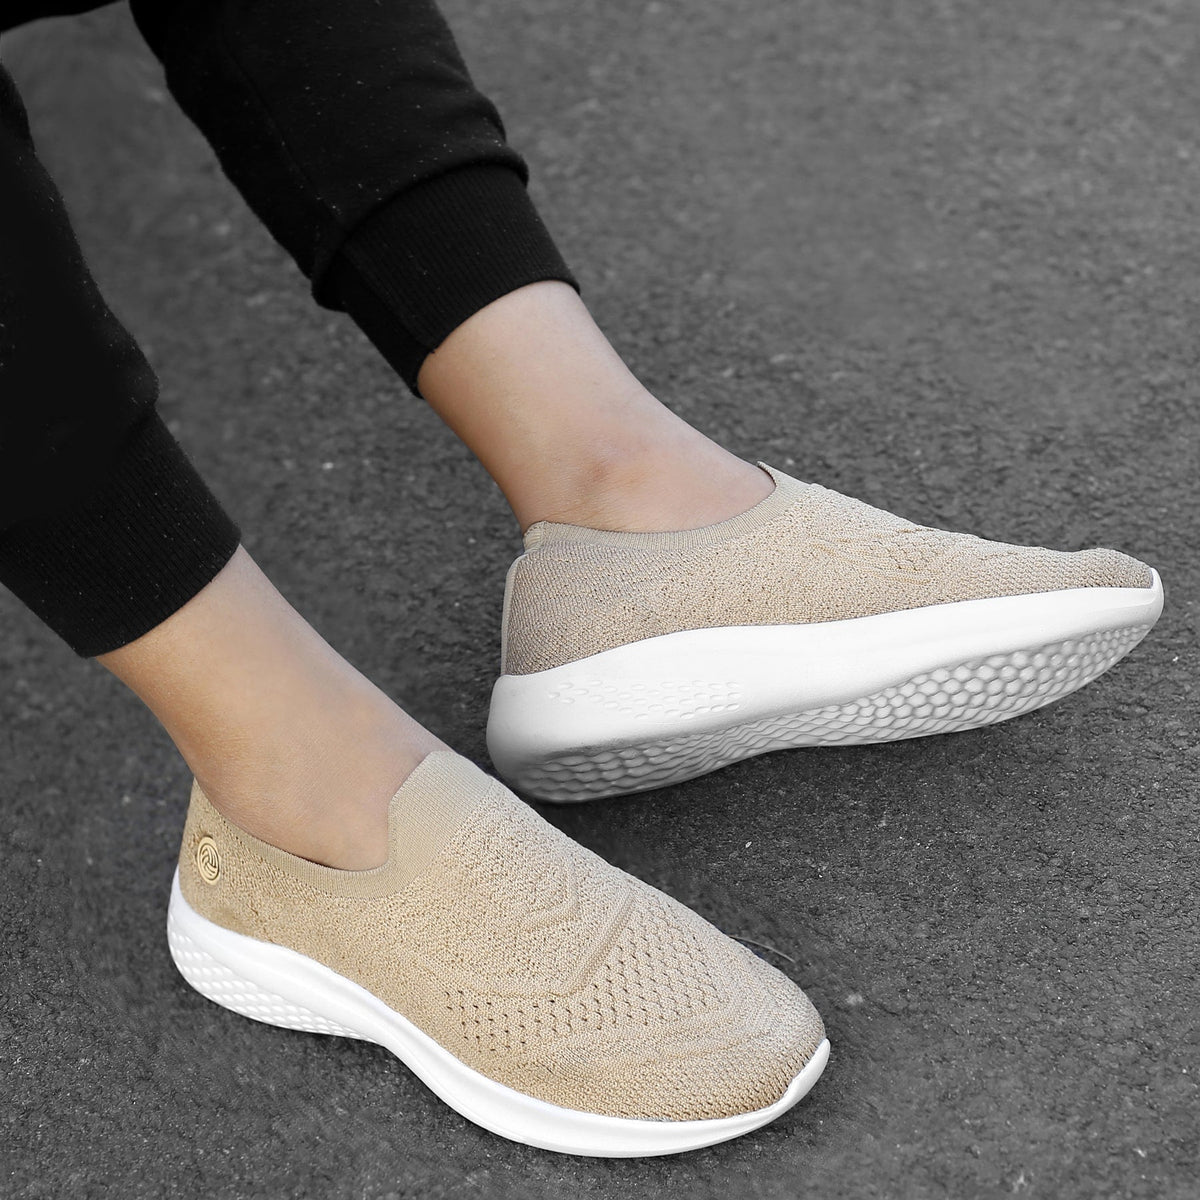 The Original Slip On Sneaker in Bright White | Women's Shoes | Rothy's